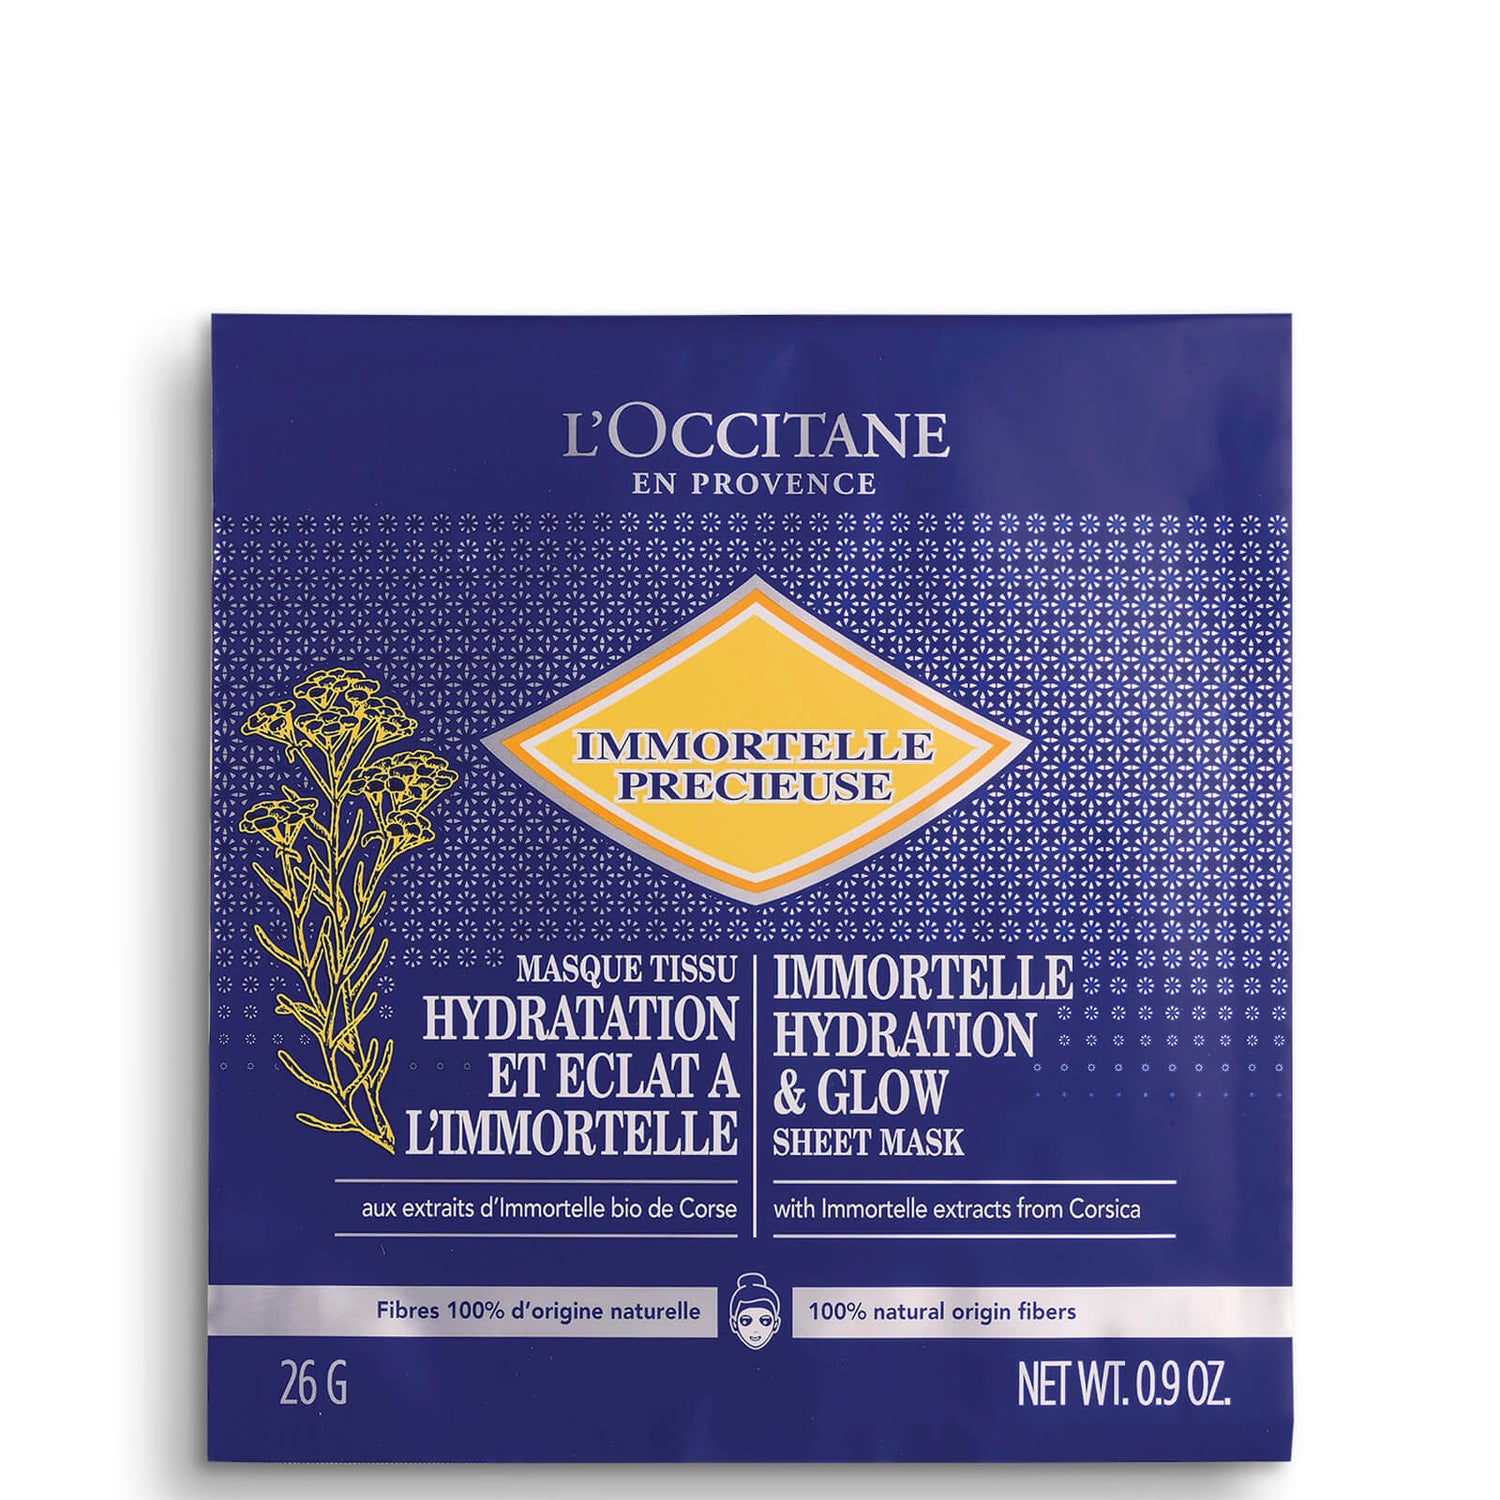 L'Occitane Immortelle Hydration and Glow Sheet Mask